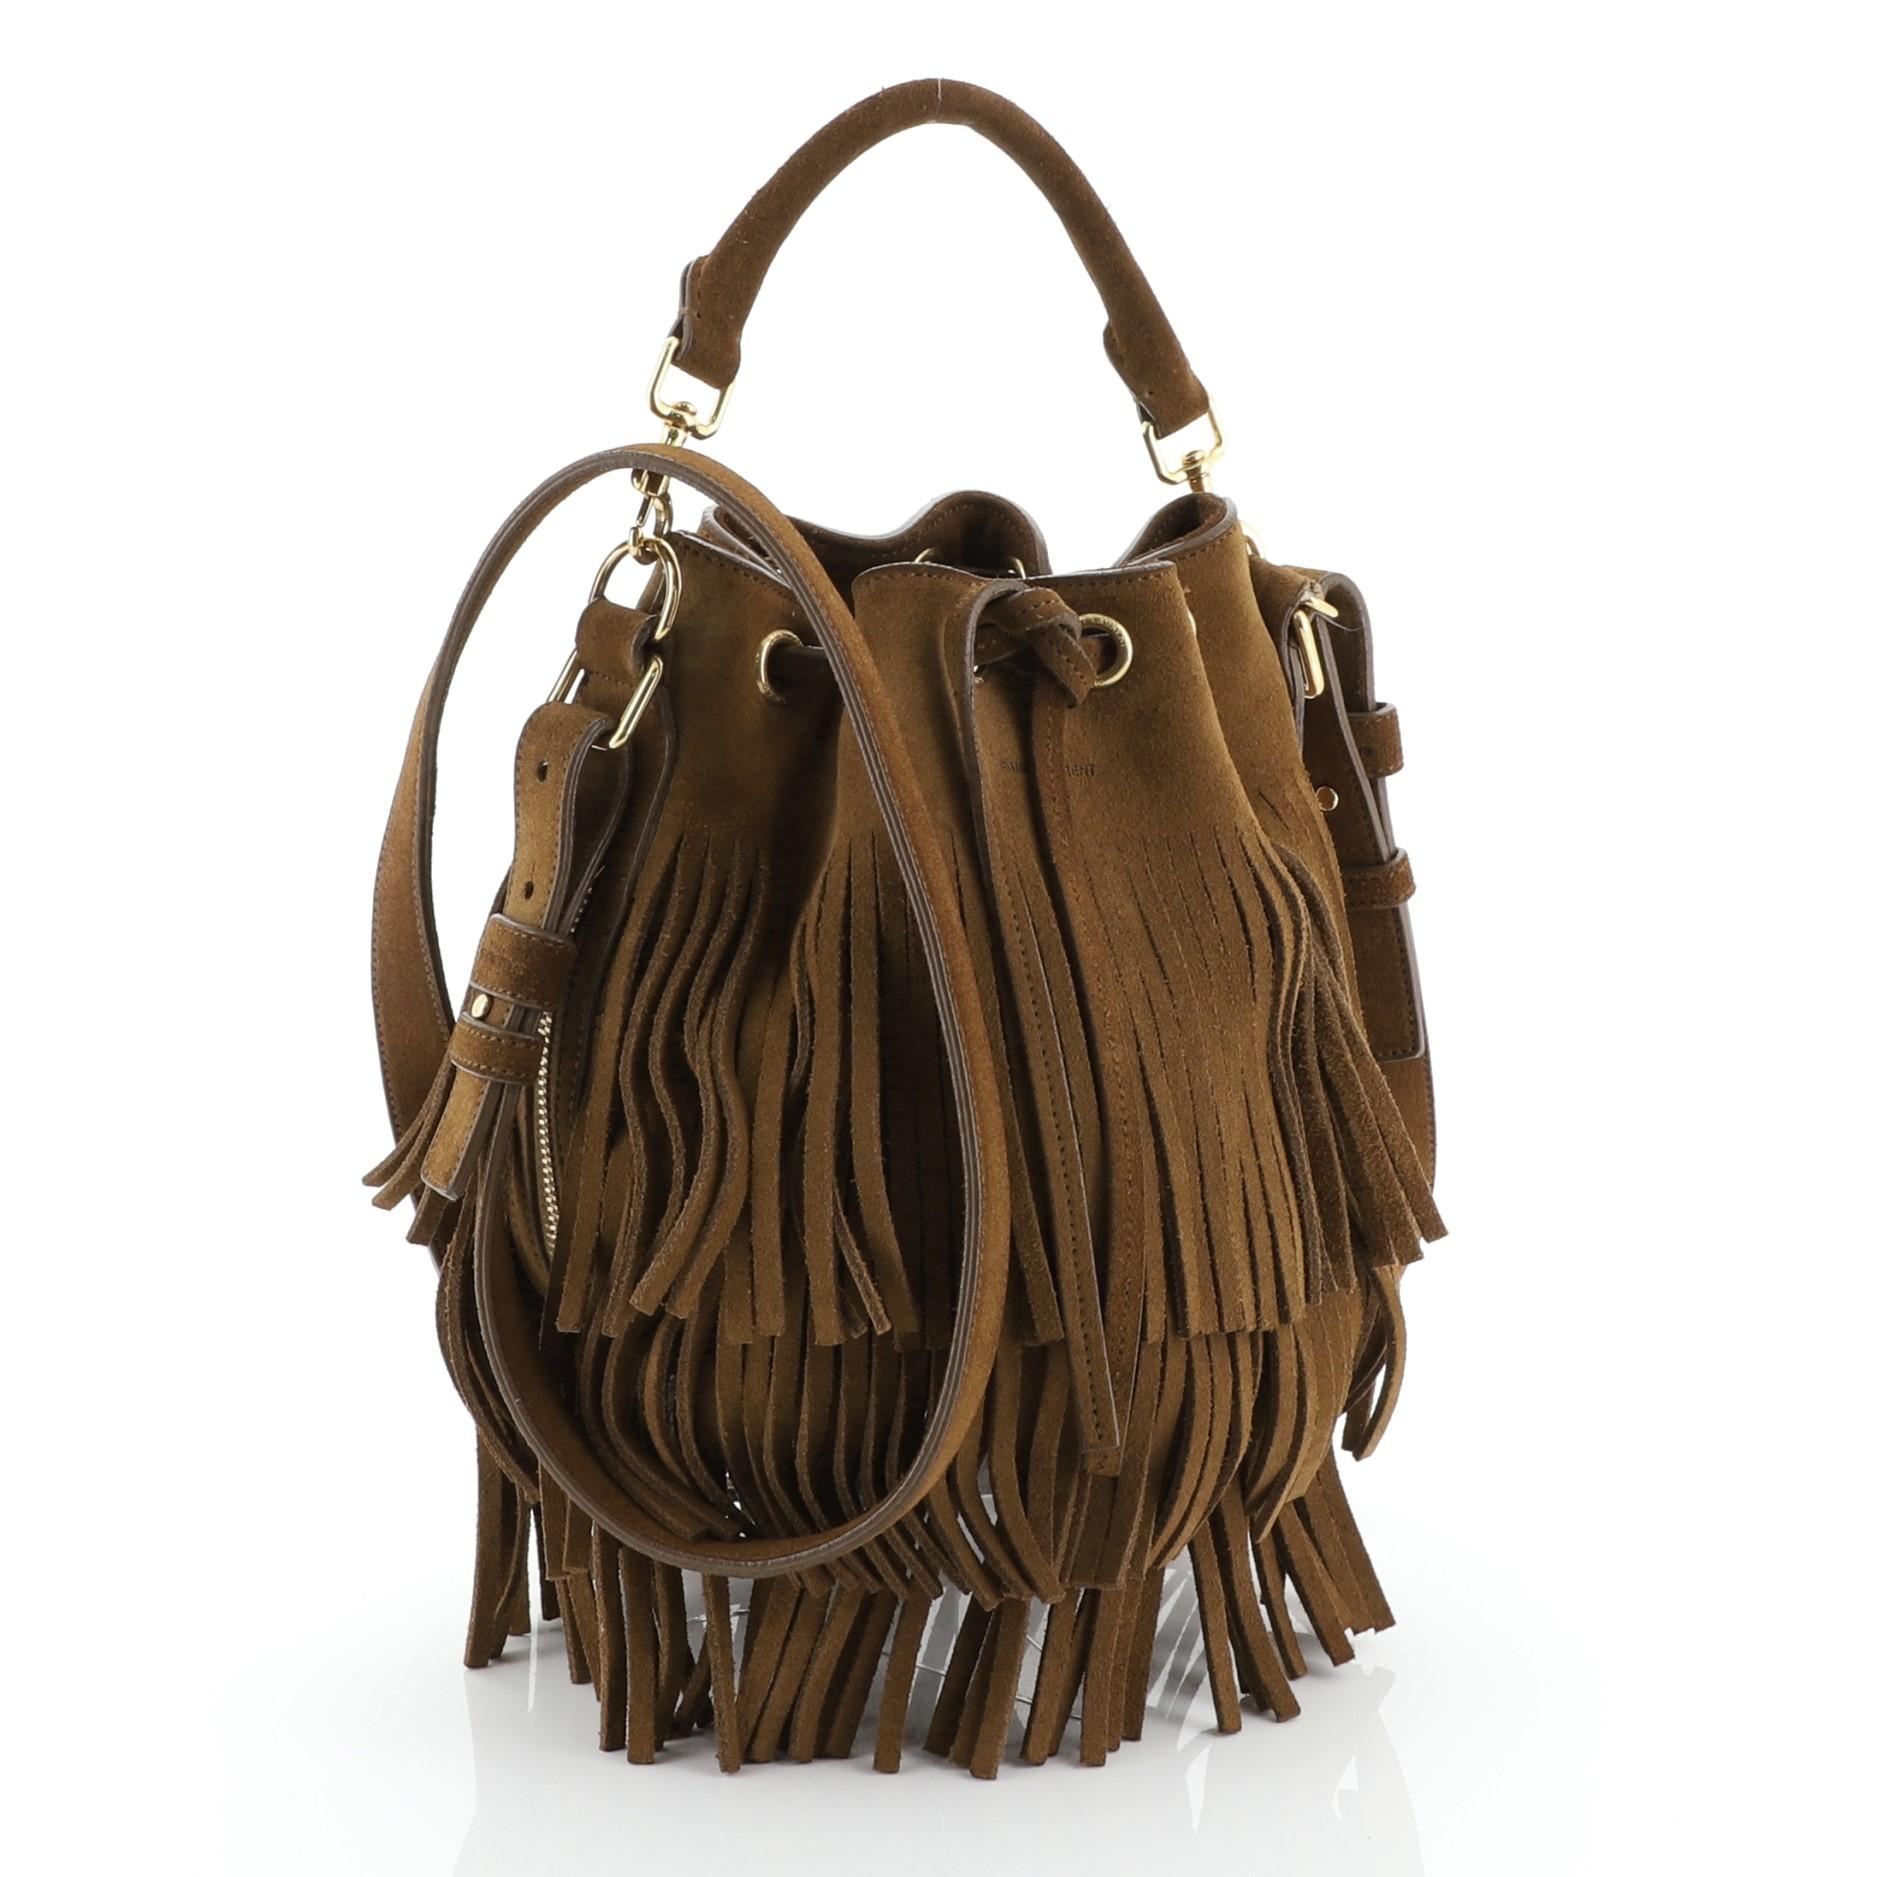 This Saint Laurent Fringe Emmanuelle Bucket Bag Suede Small, crafted in brown suede, features a detachable looped handle, adjustable suede strap, cascading, long brown suede fringes, side zip pockets and gold-tone hardware. Its drawstring closure